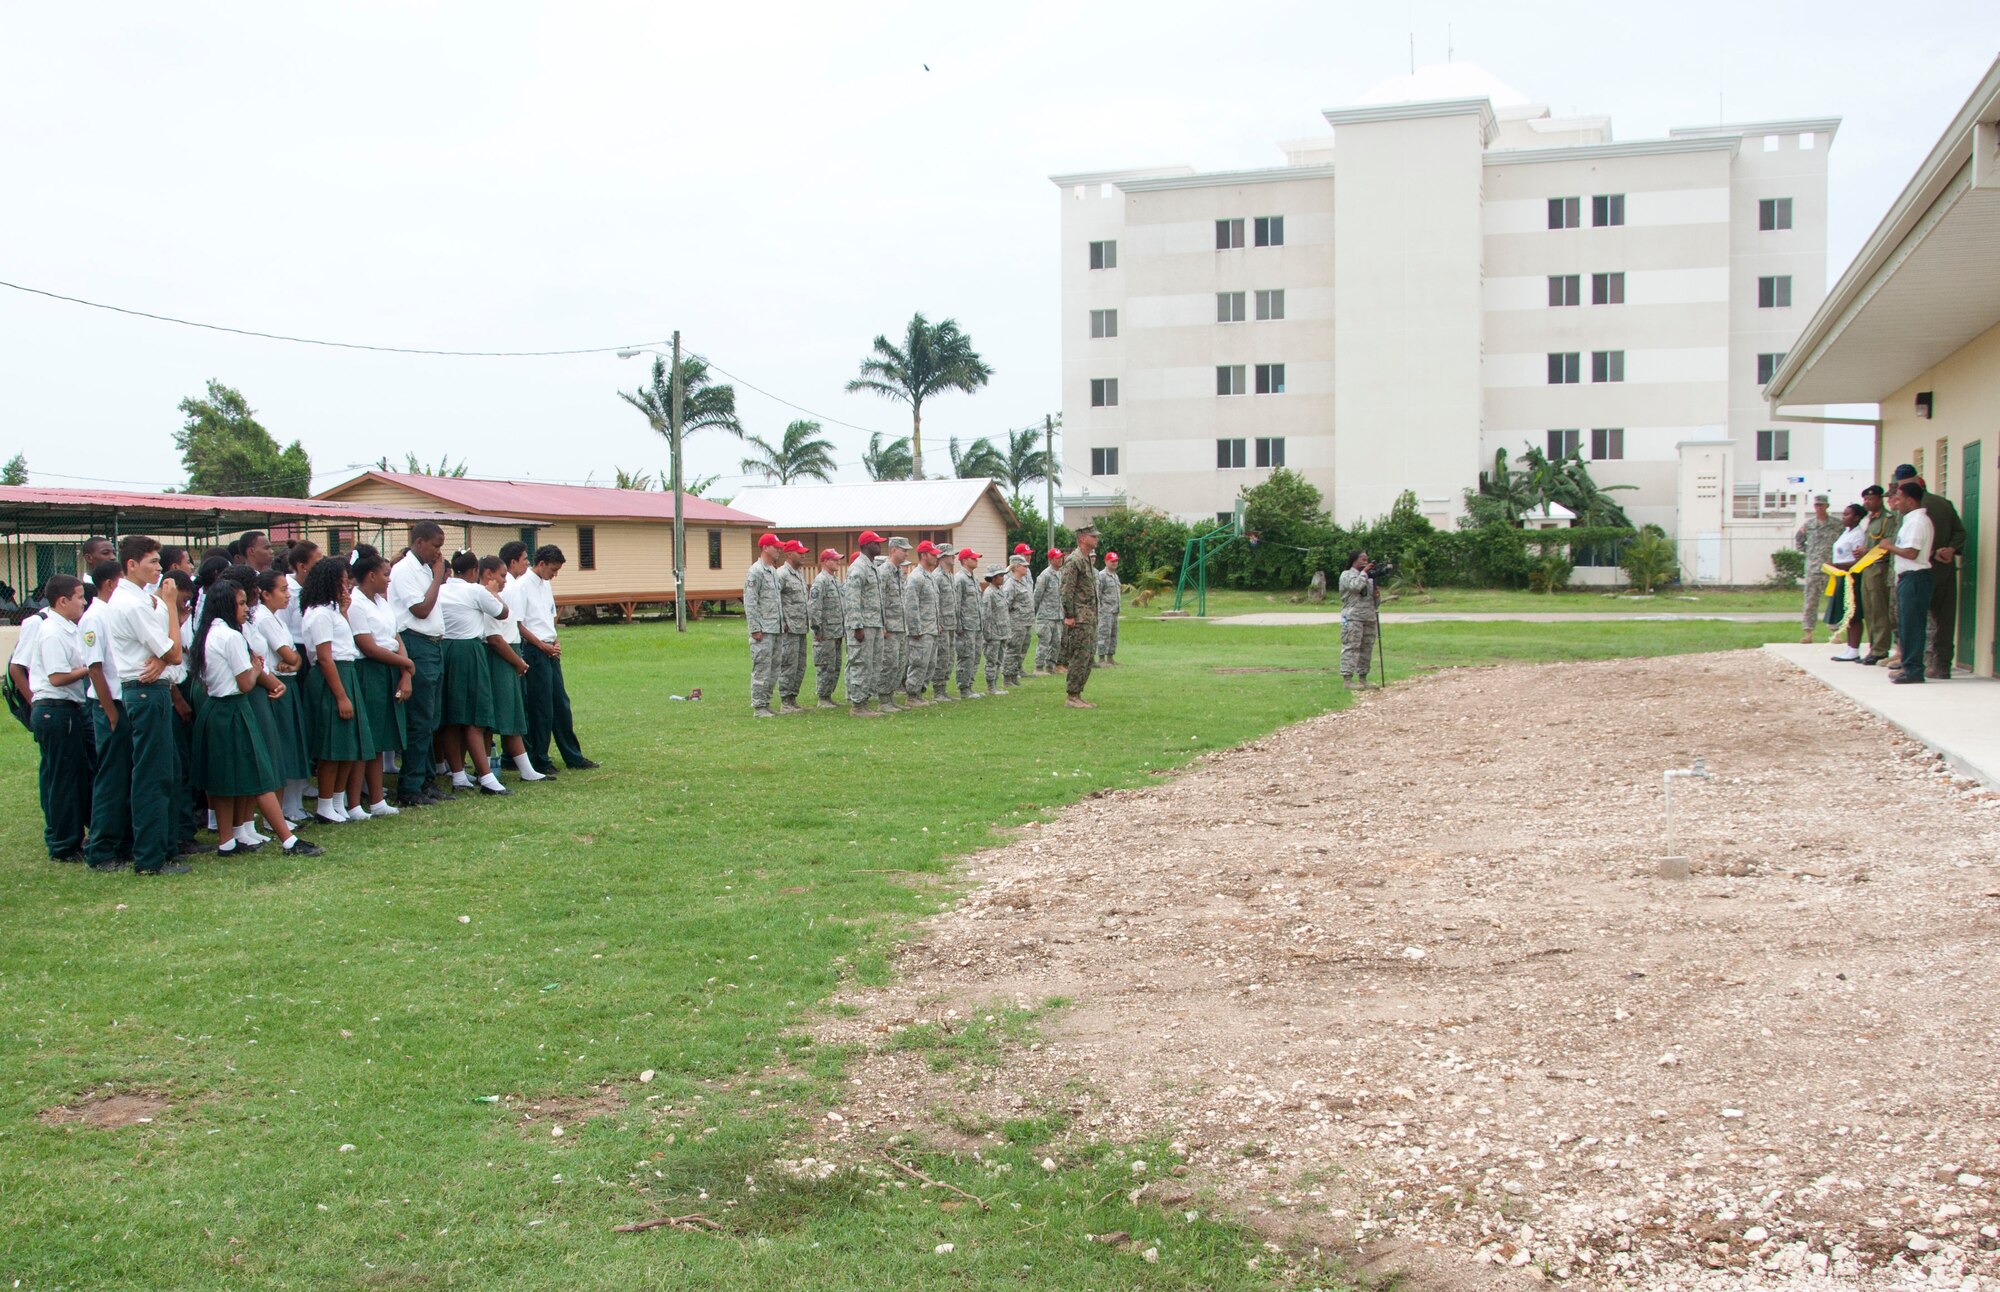 Edward P. Yorke students and teachers and U.S. and Belizean military members listen to remarks by Rodrick Cardinez, E.P. Yorke principal, during the ribbon cutting ceremony June 4, 2014, at the school in Belize City, Belize. The school's 1,372 square foot, two-classroom addition is one of five New Horizons projects in the country. New Horizons is an annual multinational exercise that provides training opportunities in civil engineering and medical care. (U.S. Air Force photo by Tech. Sgt. Kali L. Gradishar/Released)